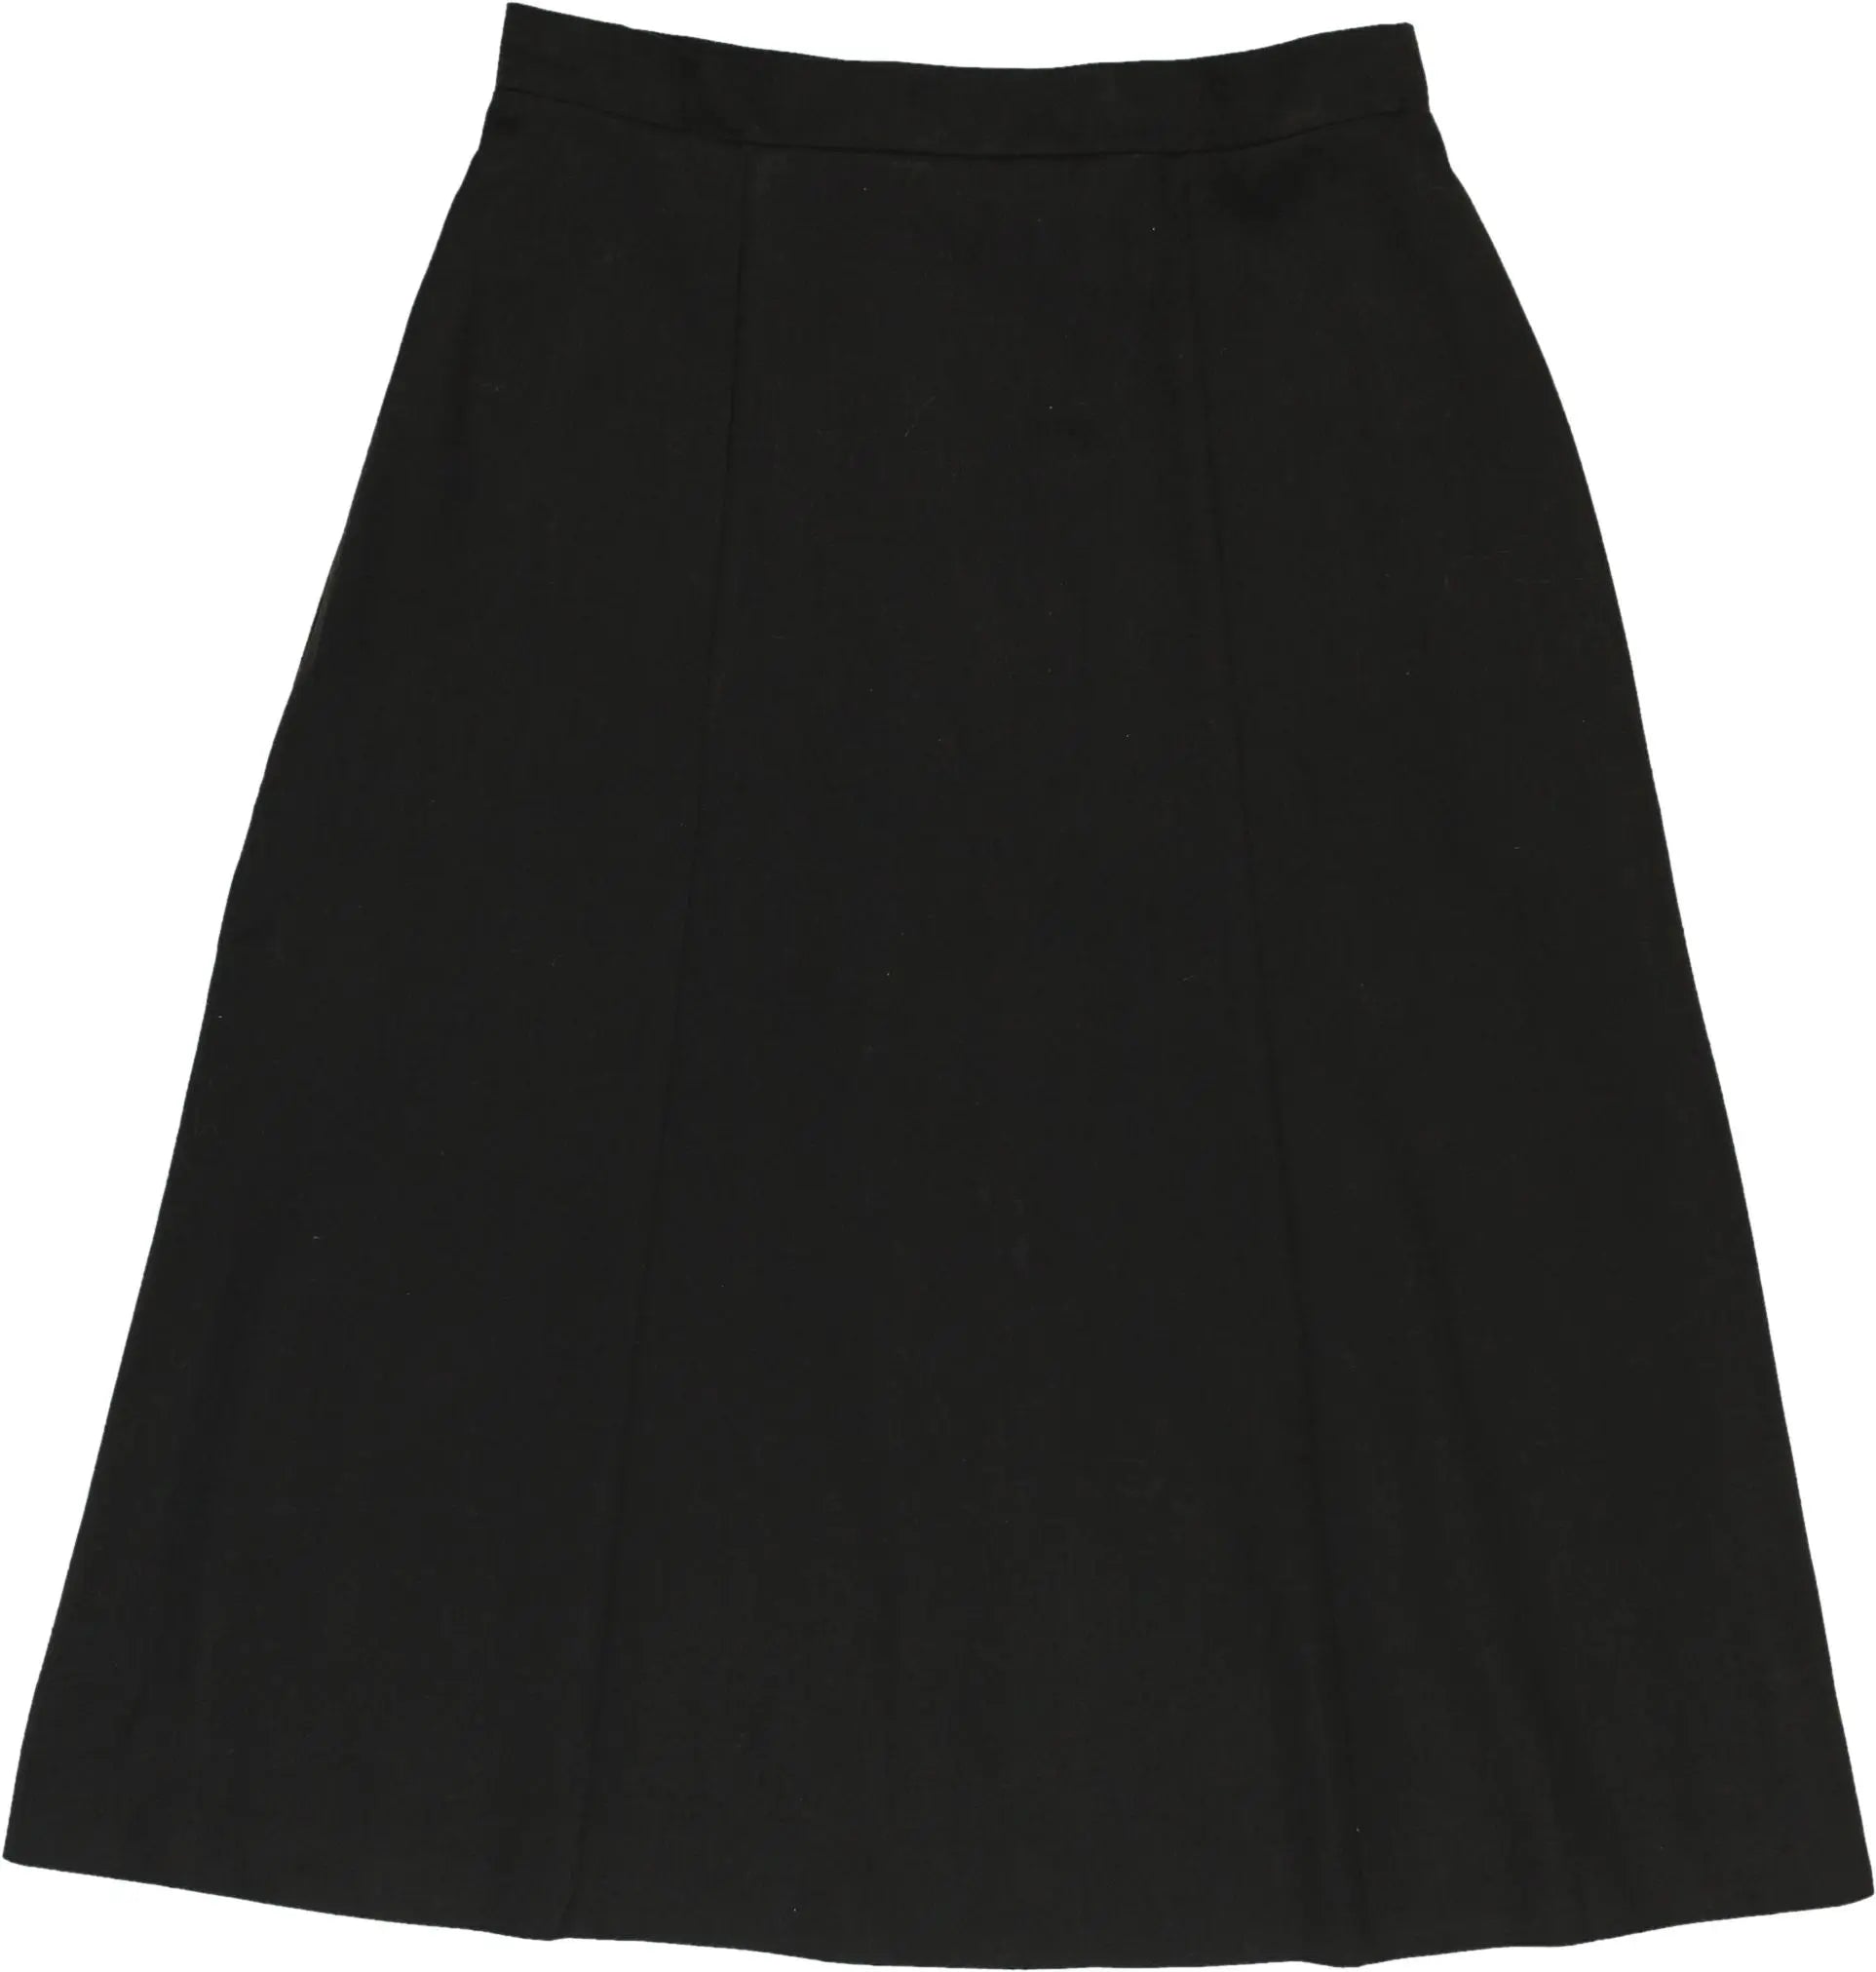 C&A - Black A-line skirt- ThriftTale.com - Vintage and second handclothing